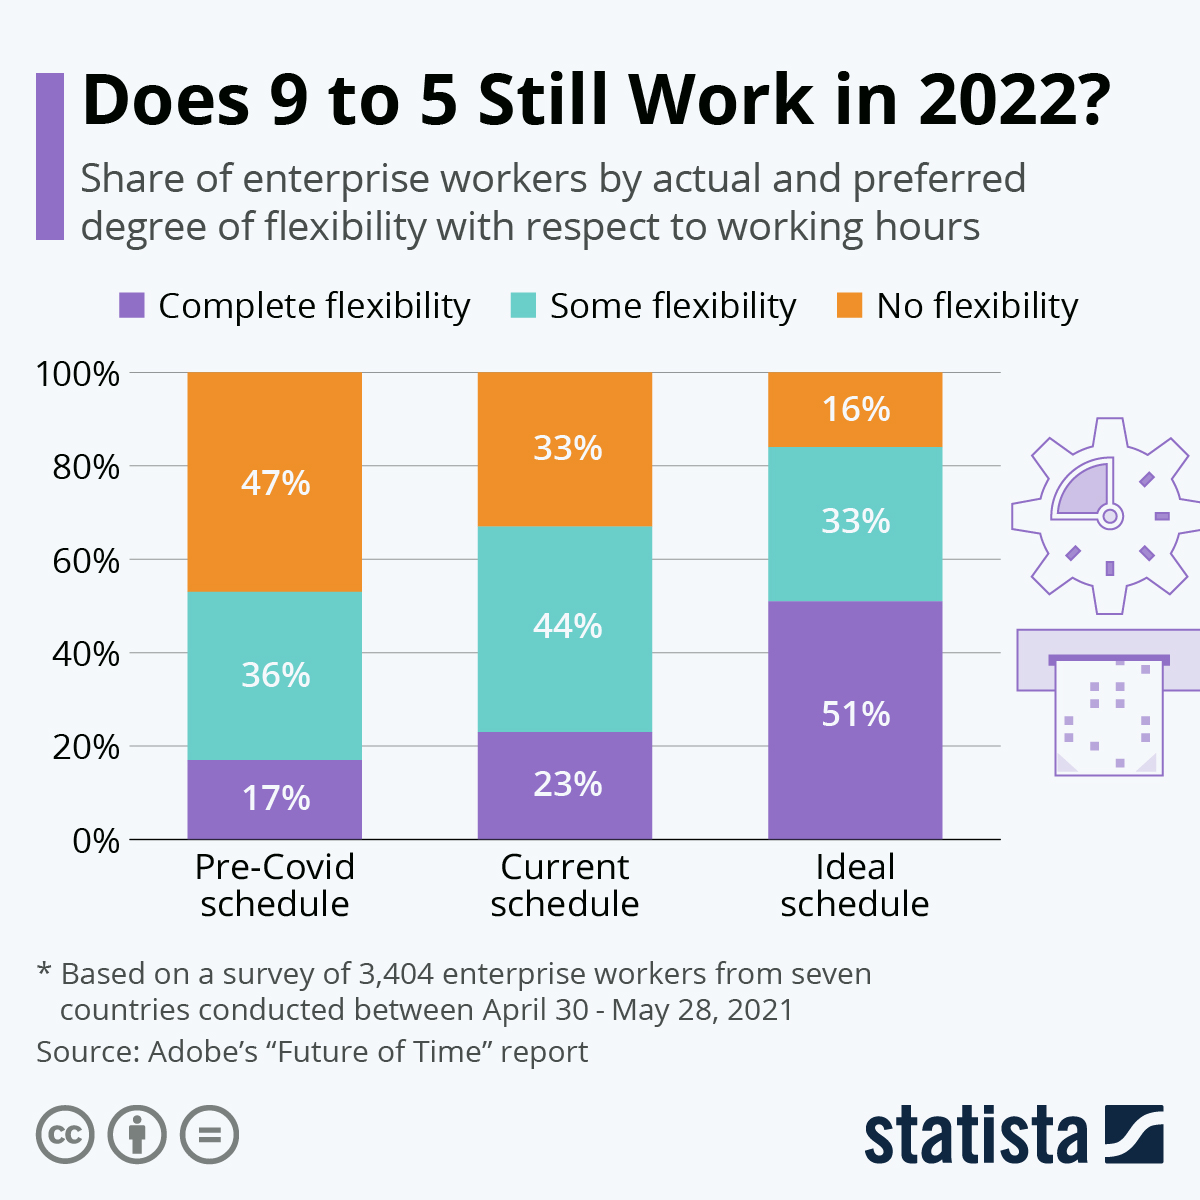 Is 9 to 5 working in 2022?